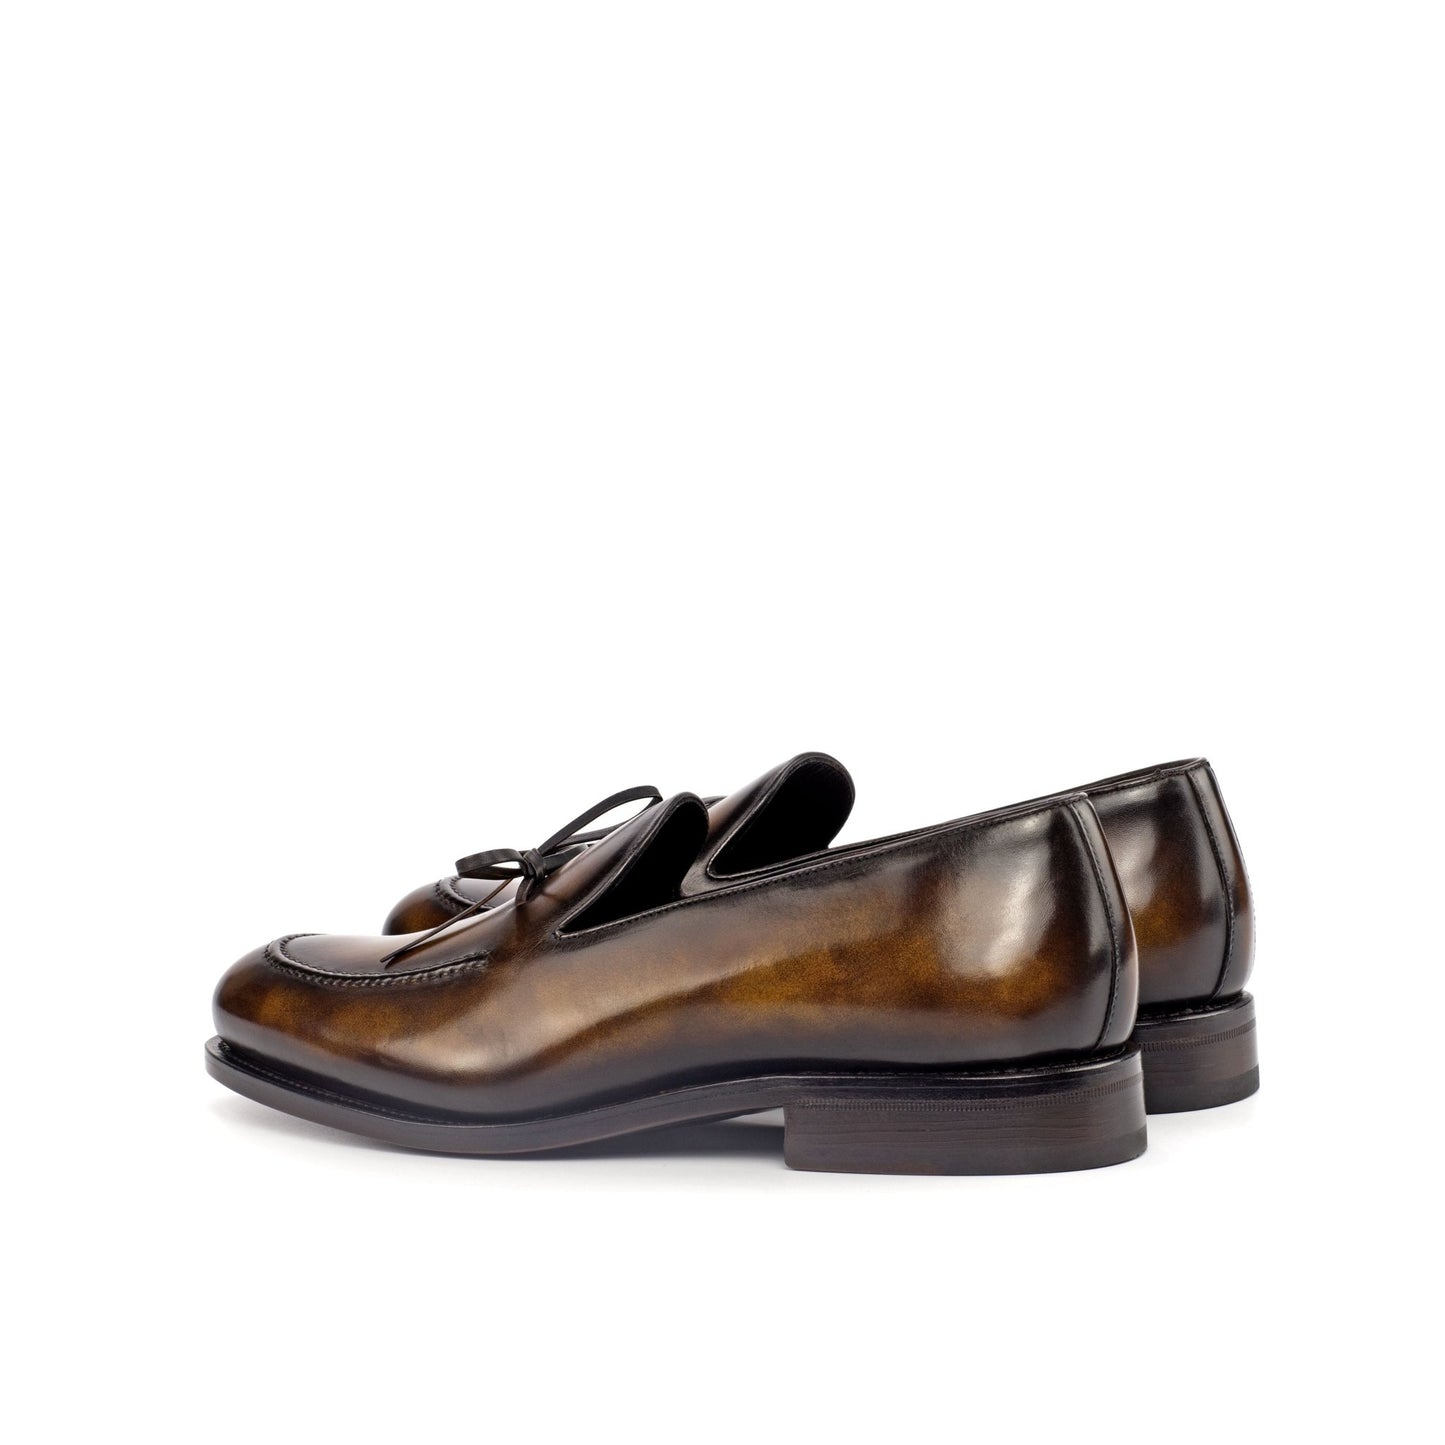 Bow Loafer in Tobacco Patina - Zatorres | Free Shipping on orders over $200